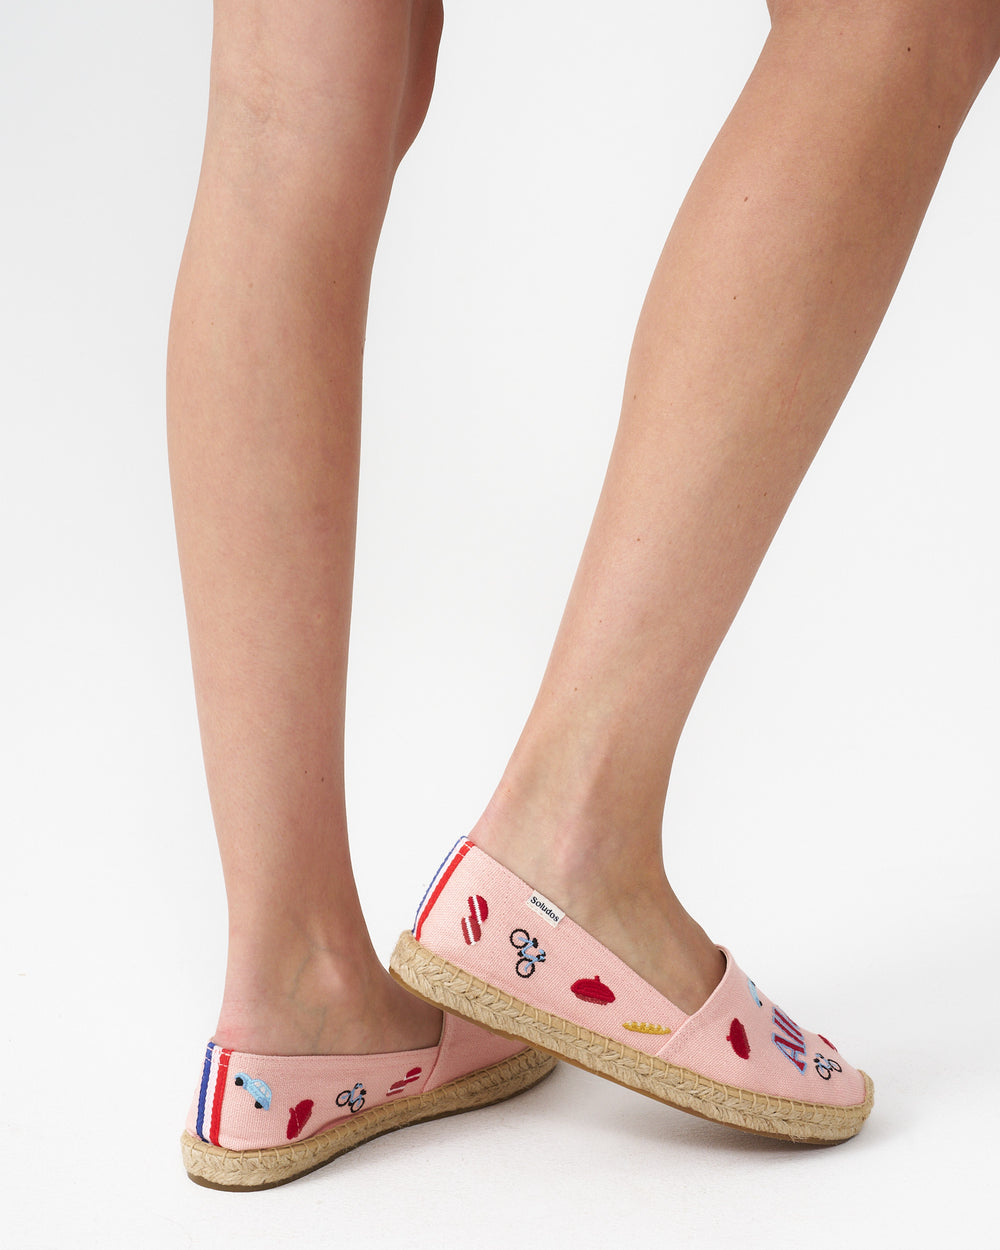 The Original Espadrille - Embroidery / France - Rosa Pink - Women's